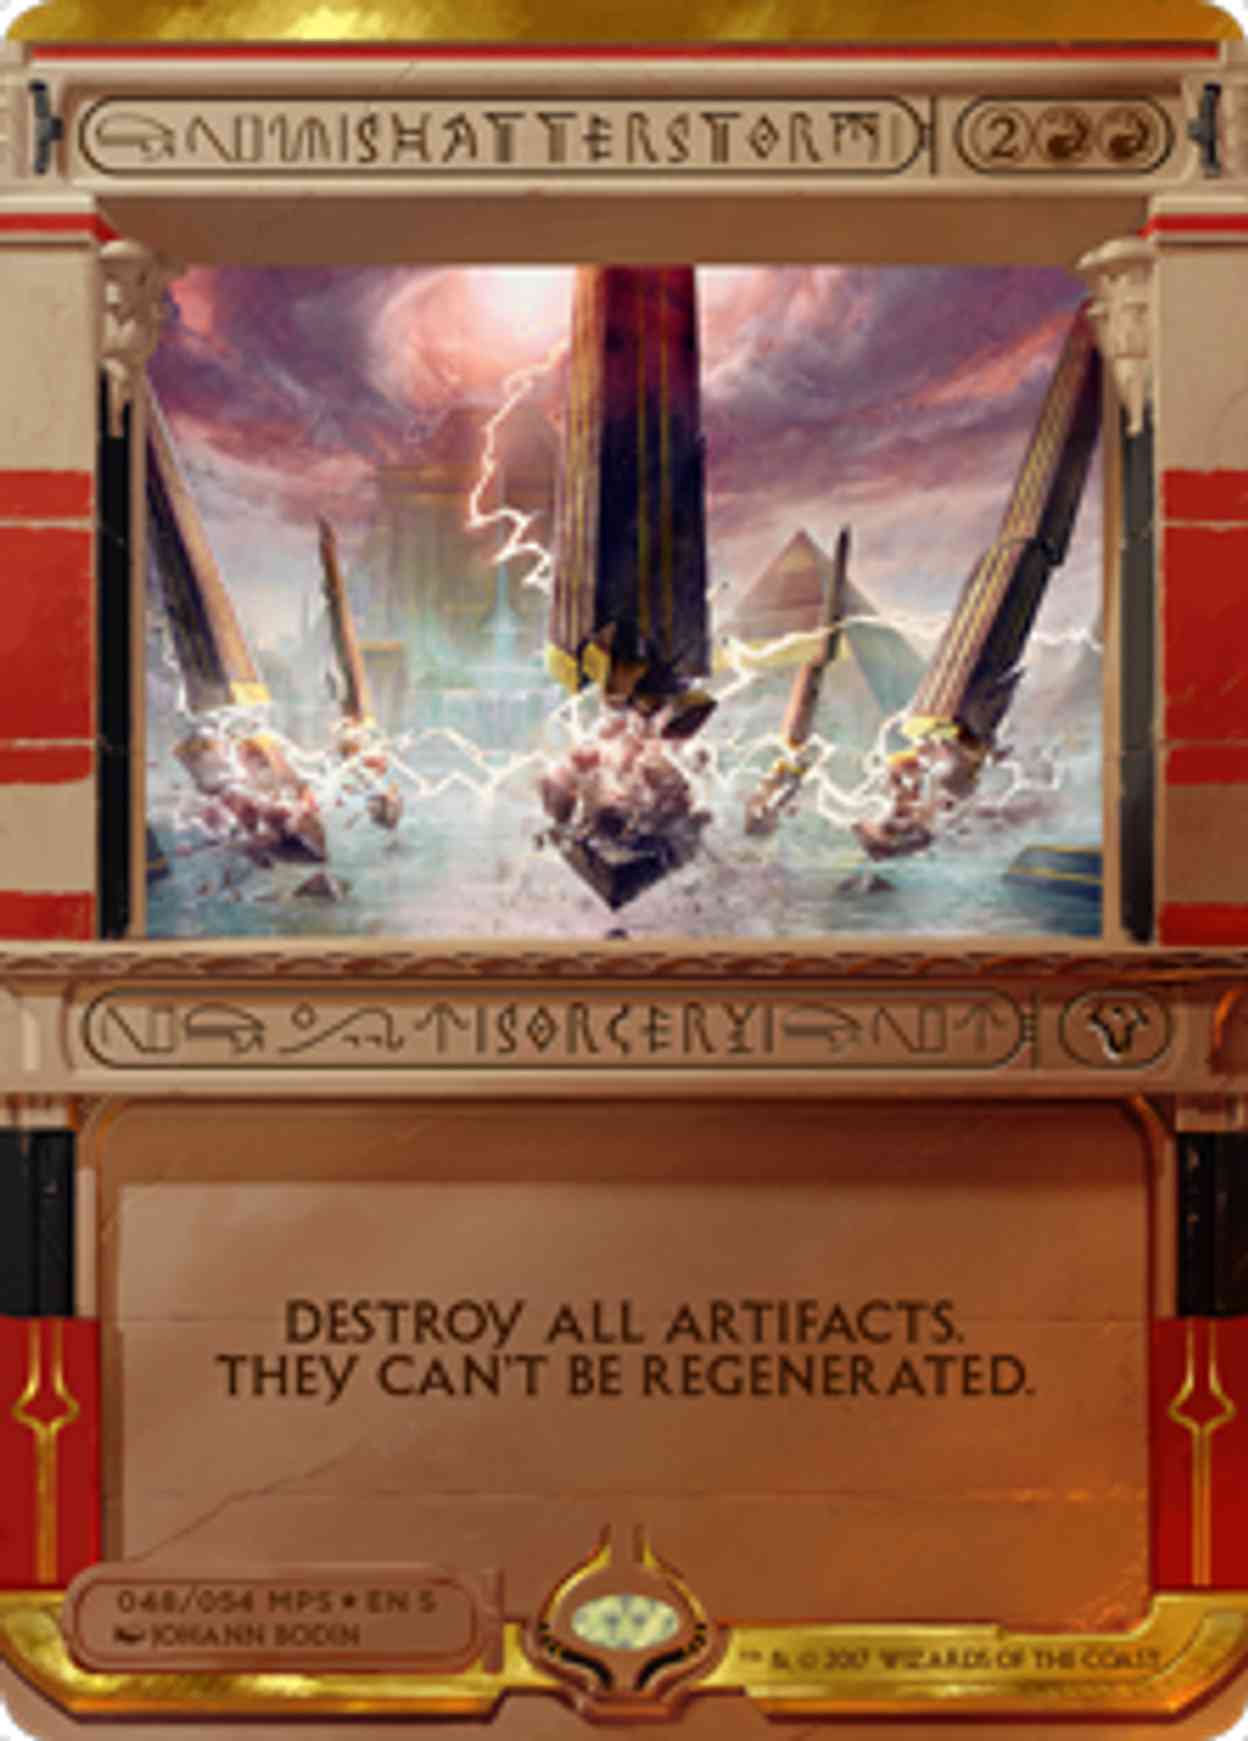 Shatterstorm magic card front